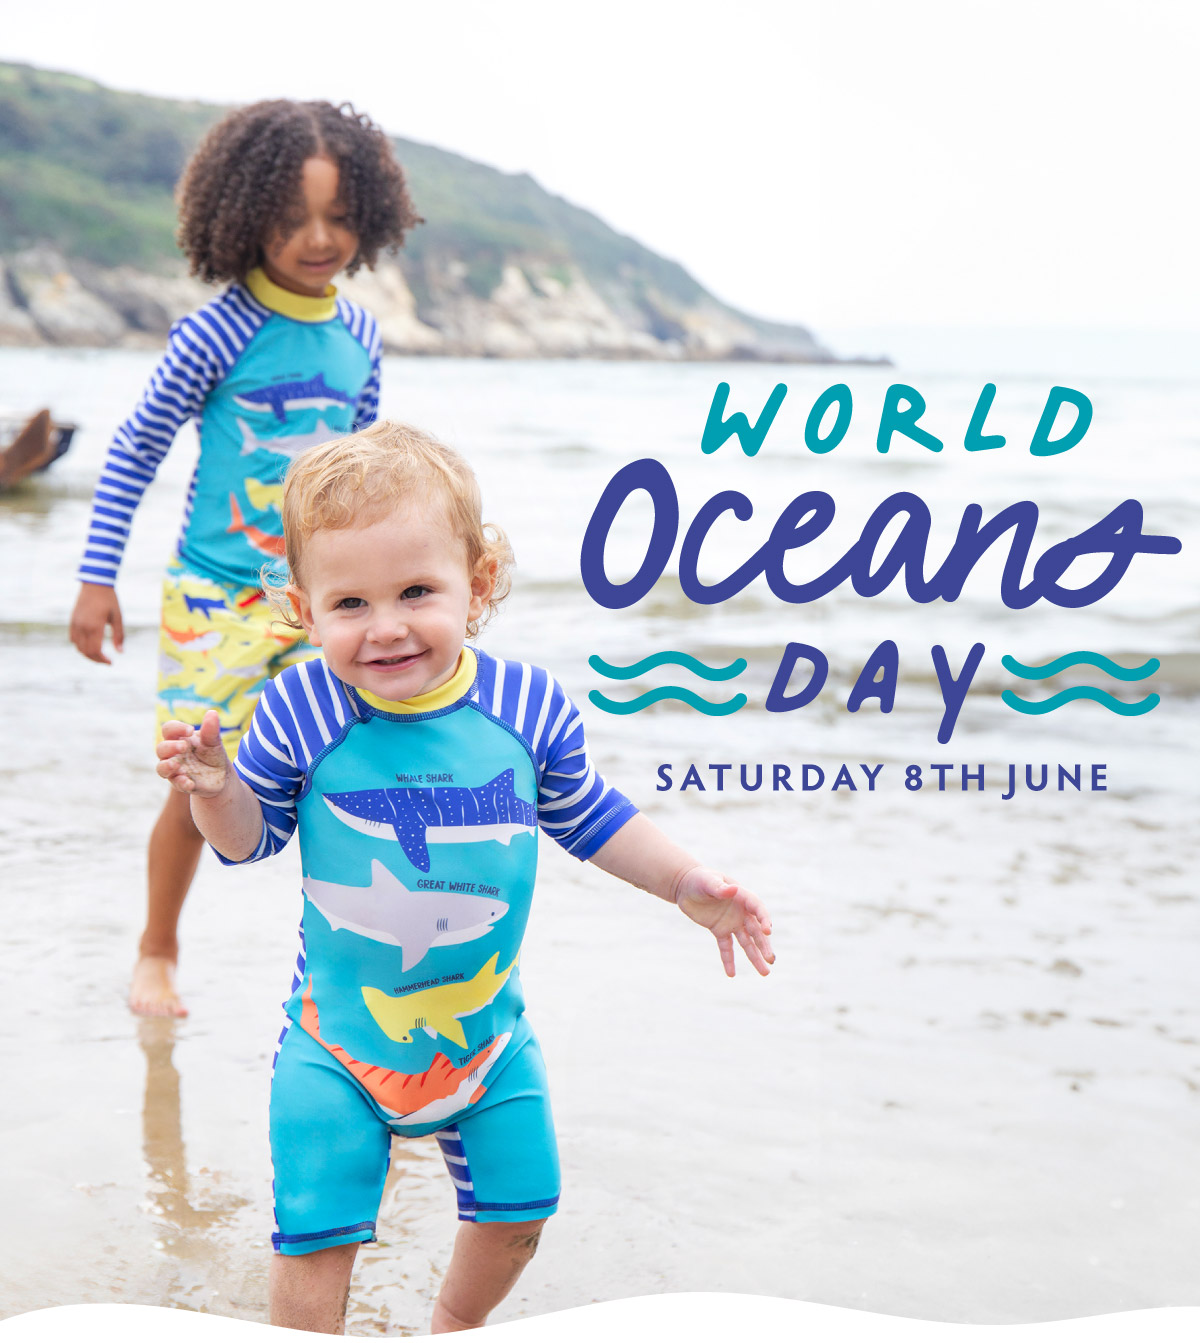 World Oceans Day. Saturday 8th June